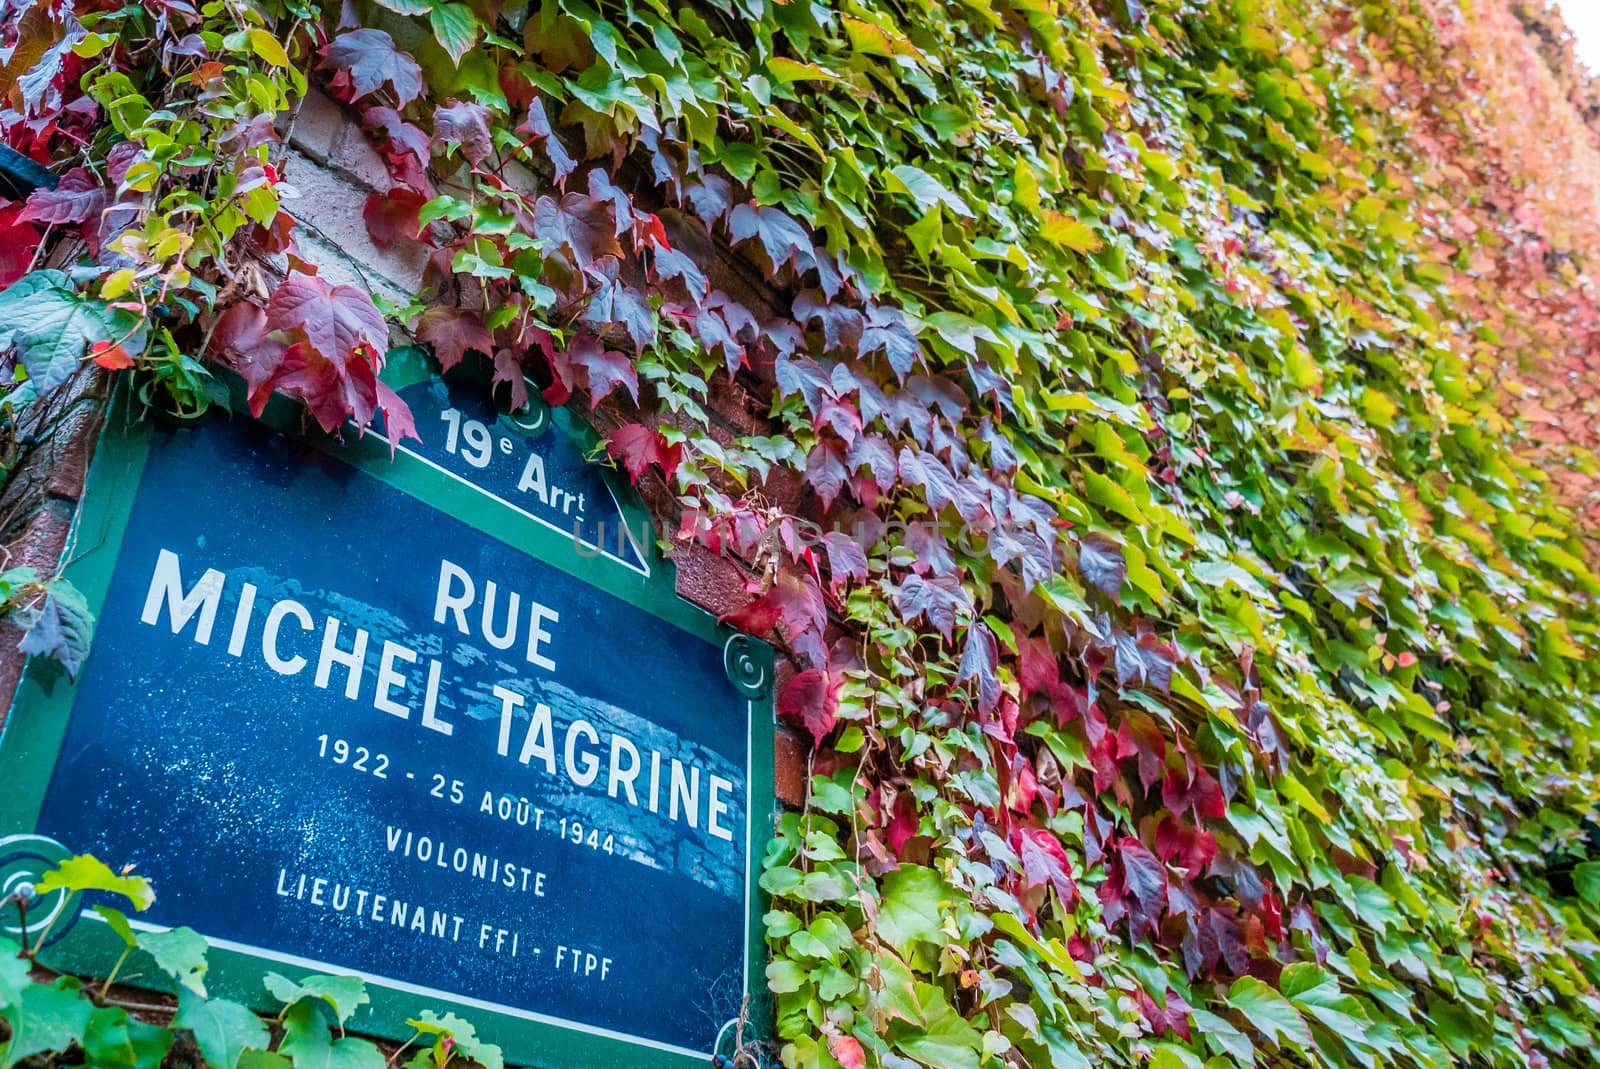 Michel Tagrine street in 19th arrondissement district of Paris with a background of red and green leaves